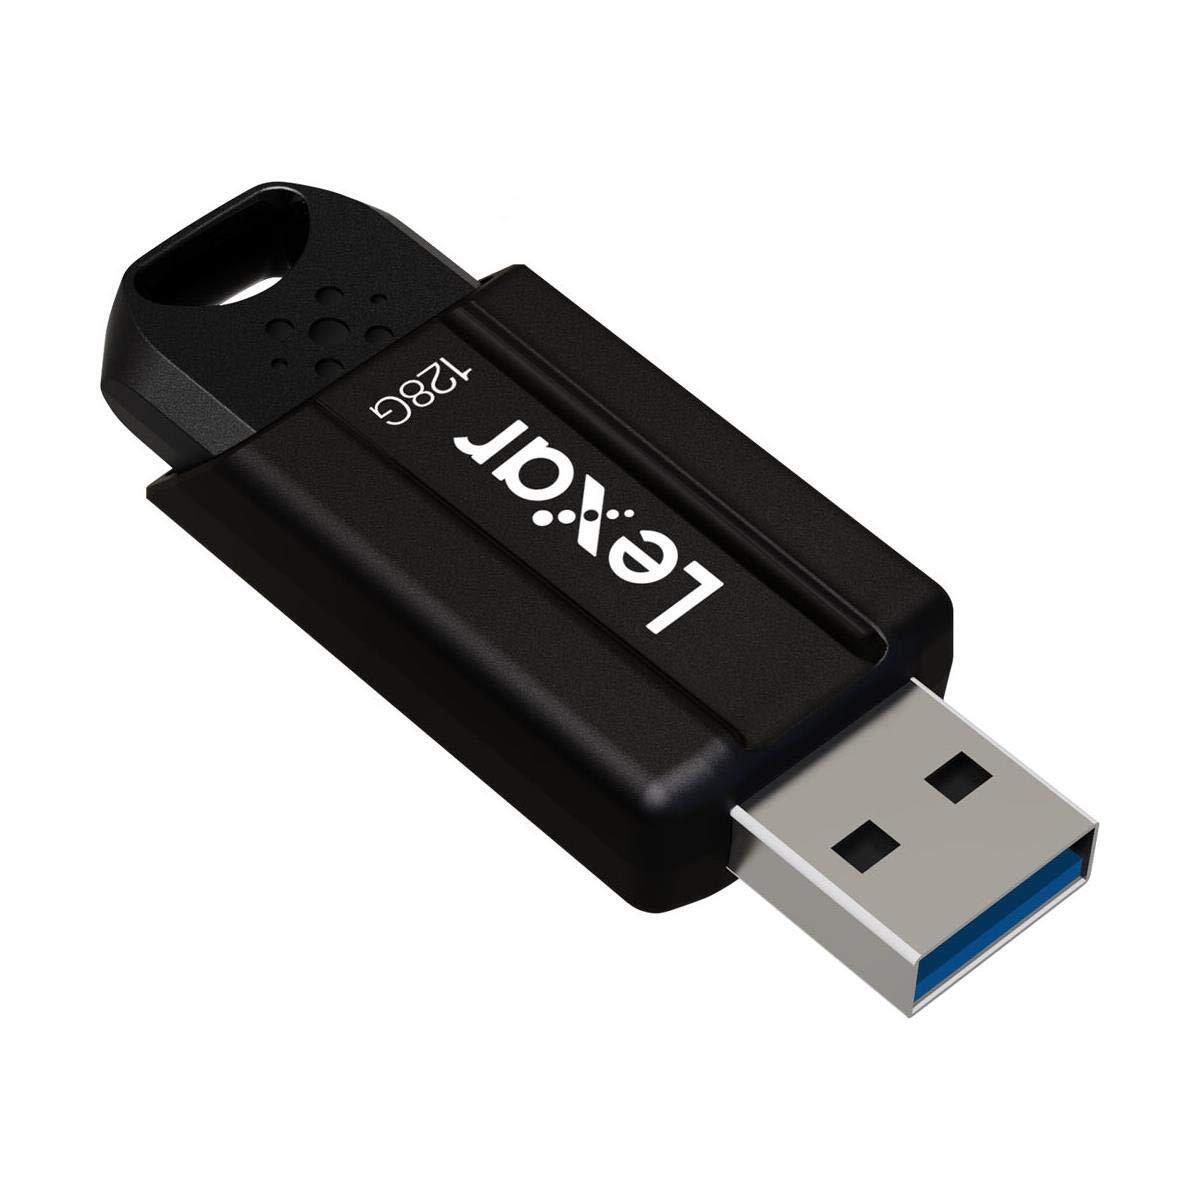 128GB JumpDrive S80 USB 3.1 Flash Drive for Storage Expansion and Backup, Up ...